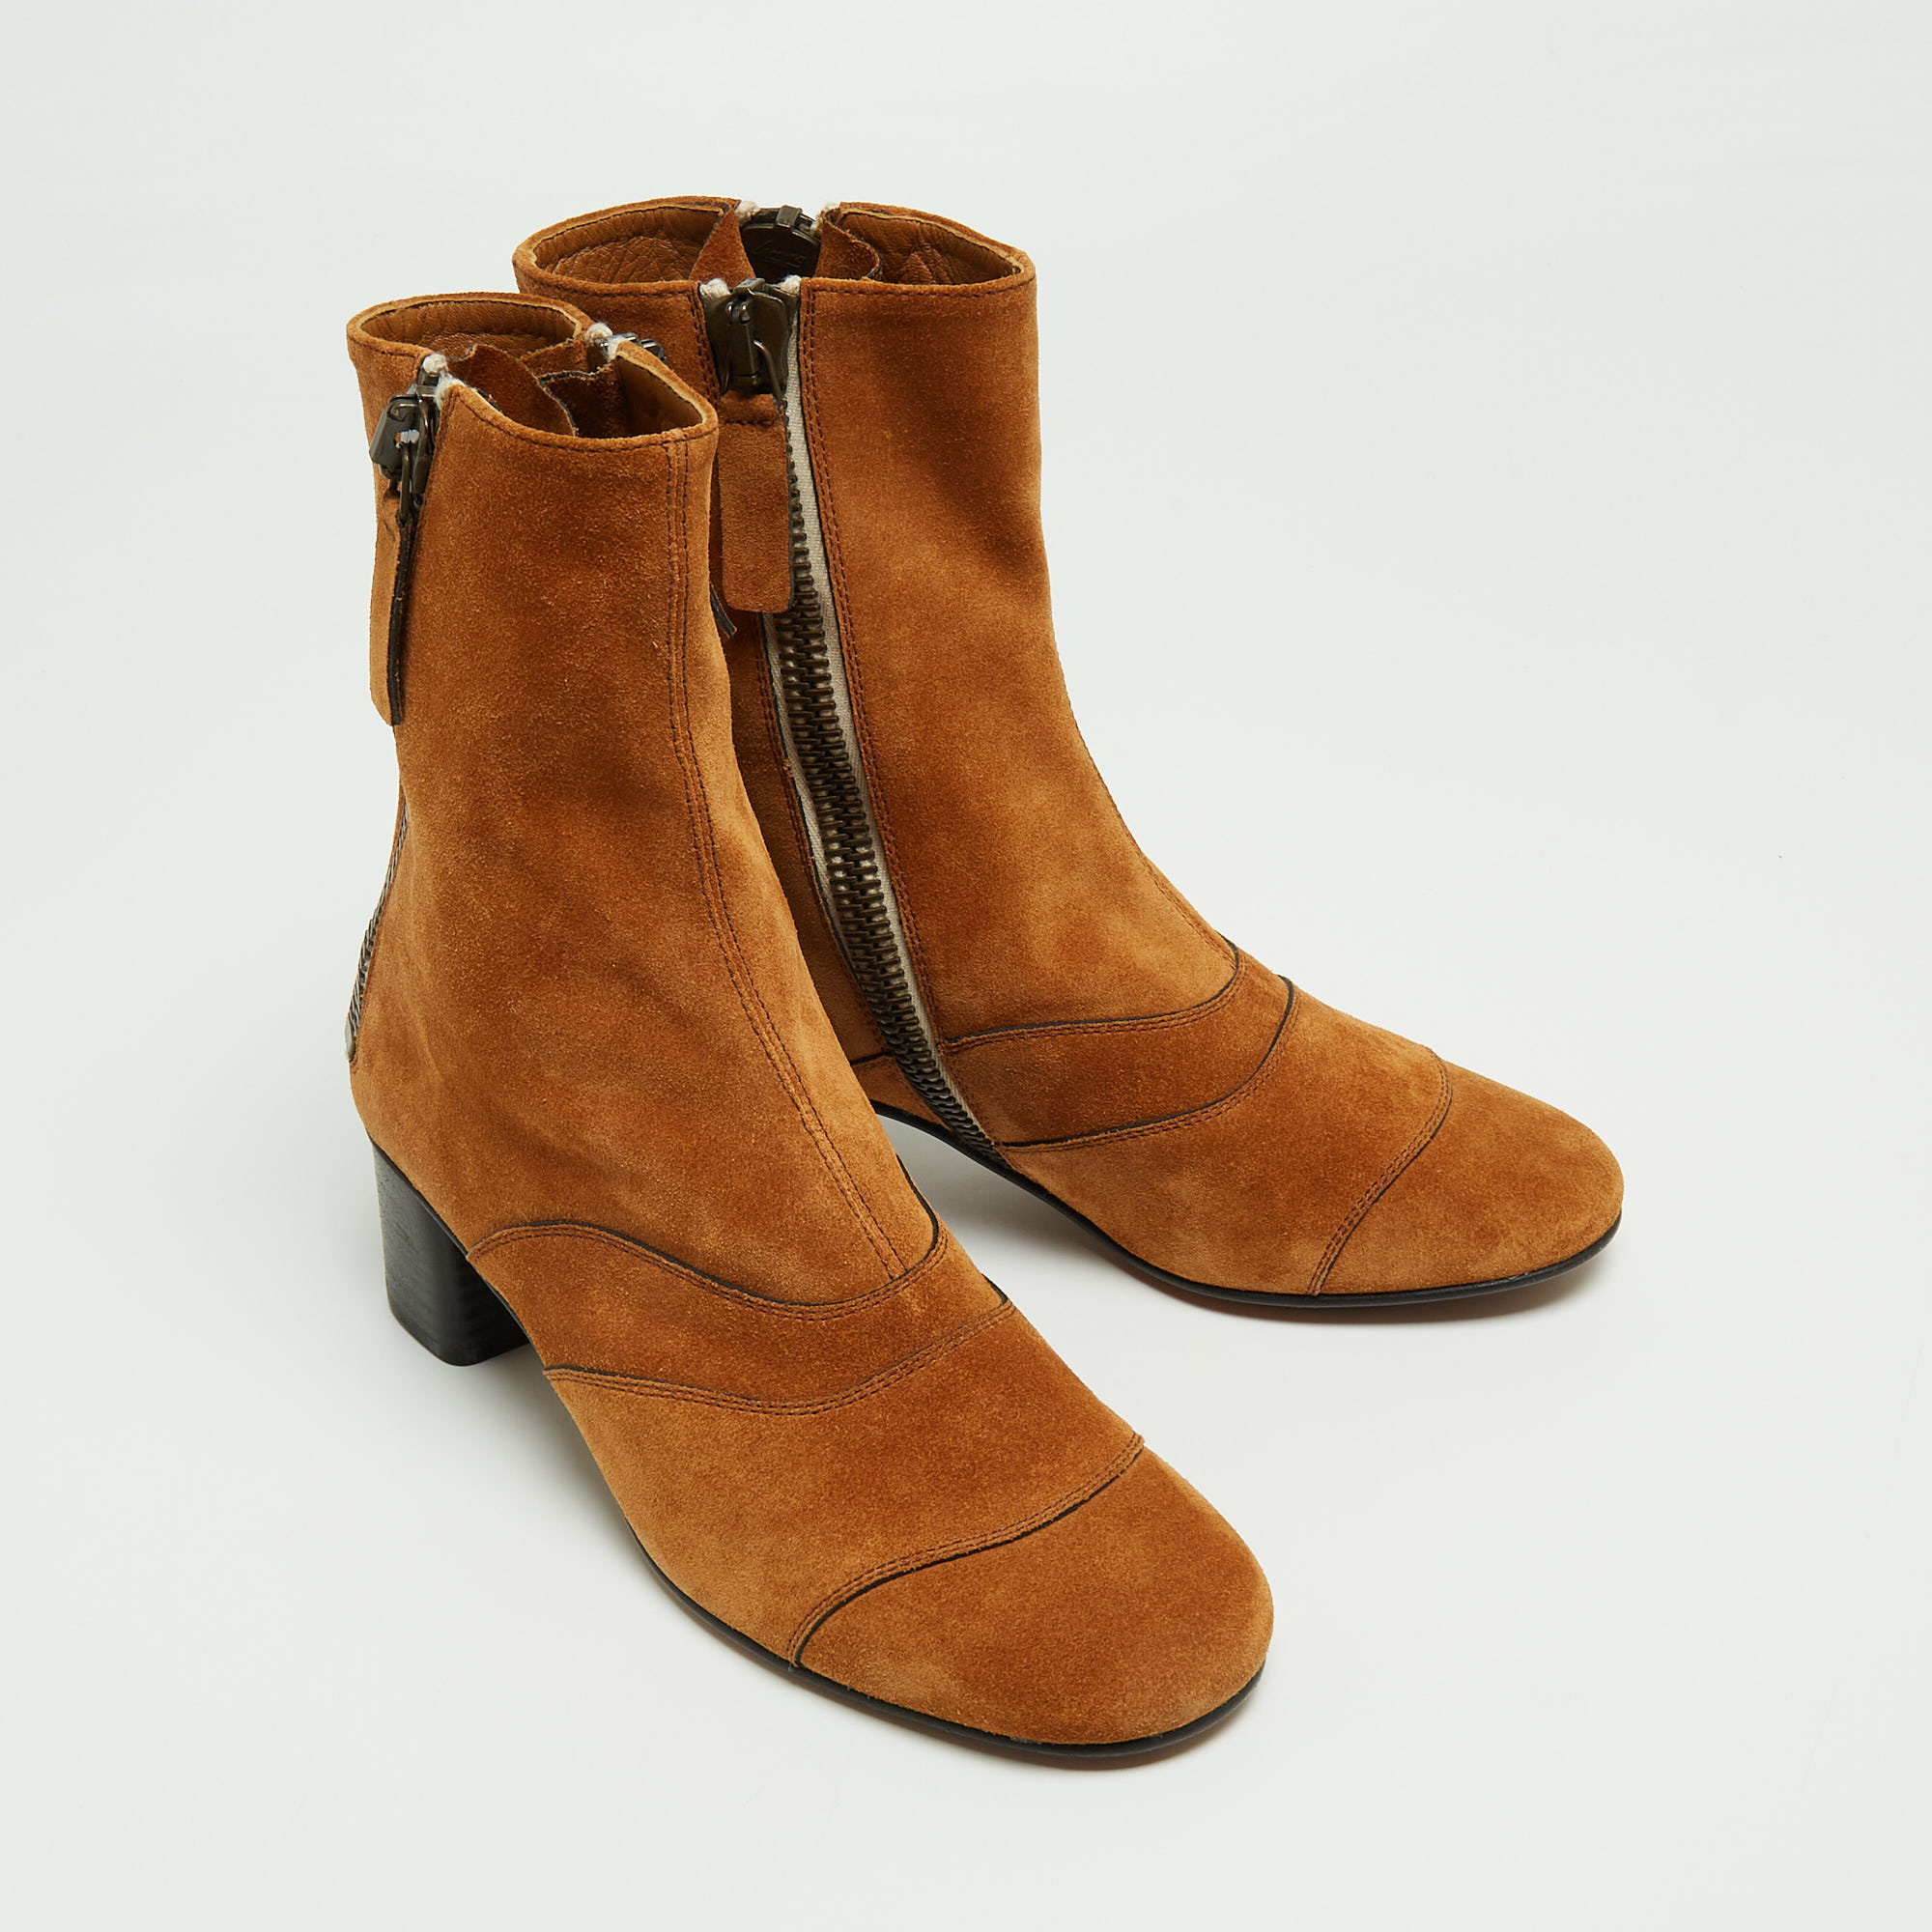 Chloe Brown Suede Ankle Boots Size 36